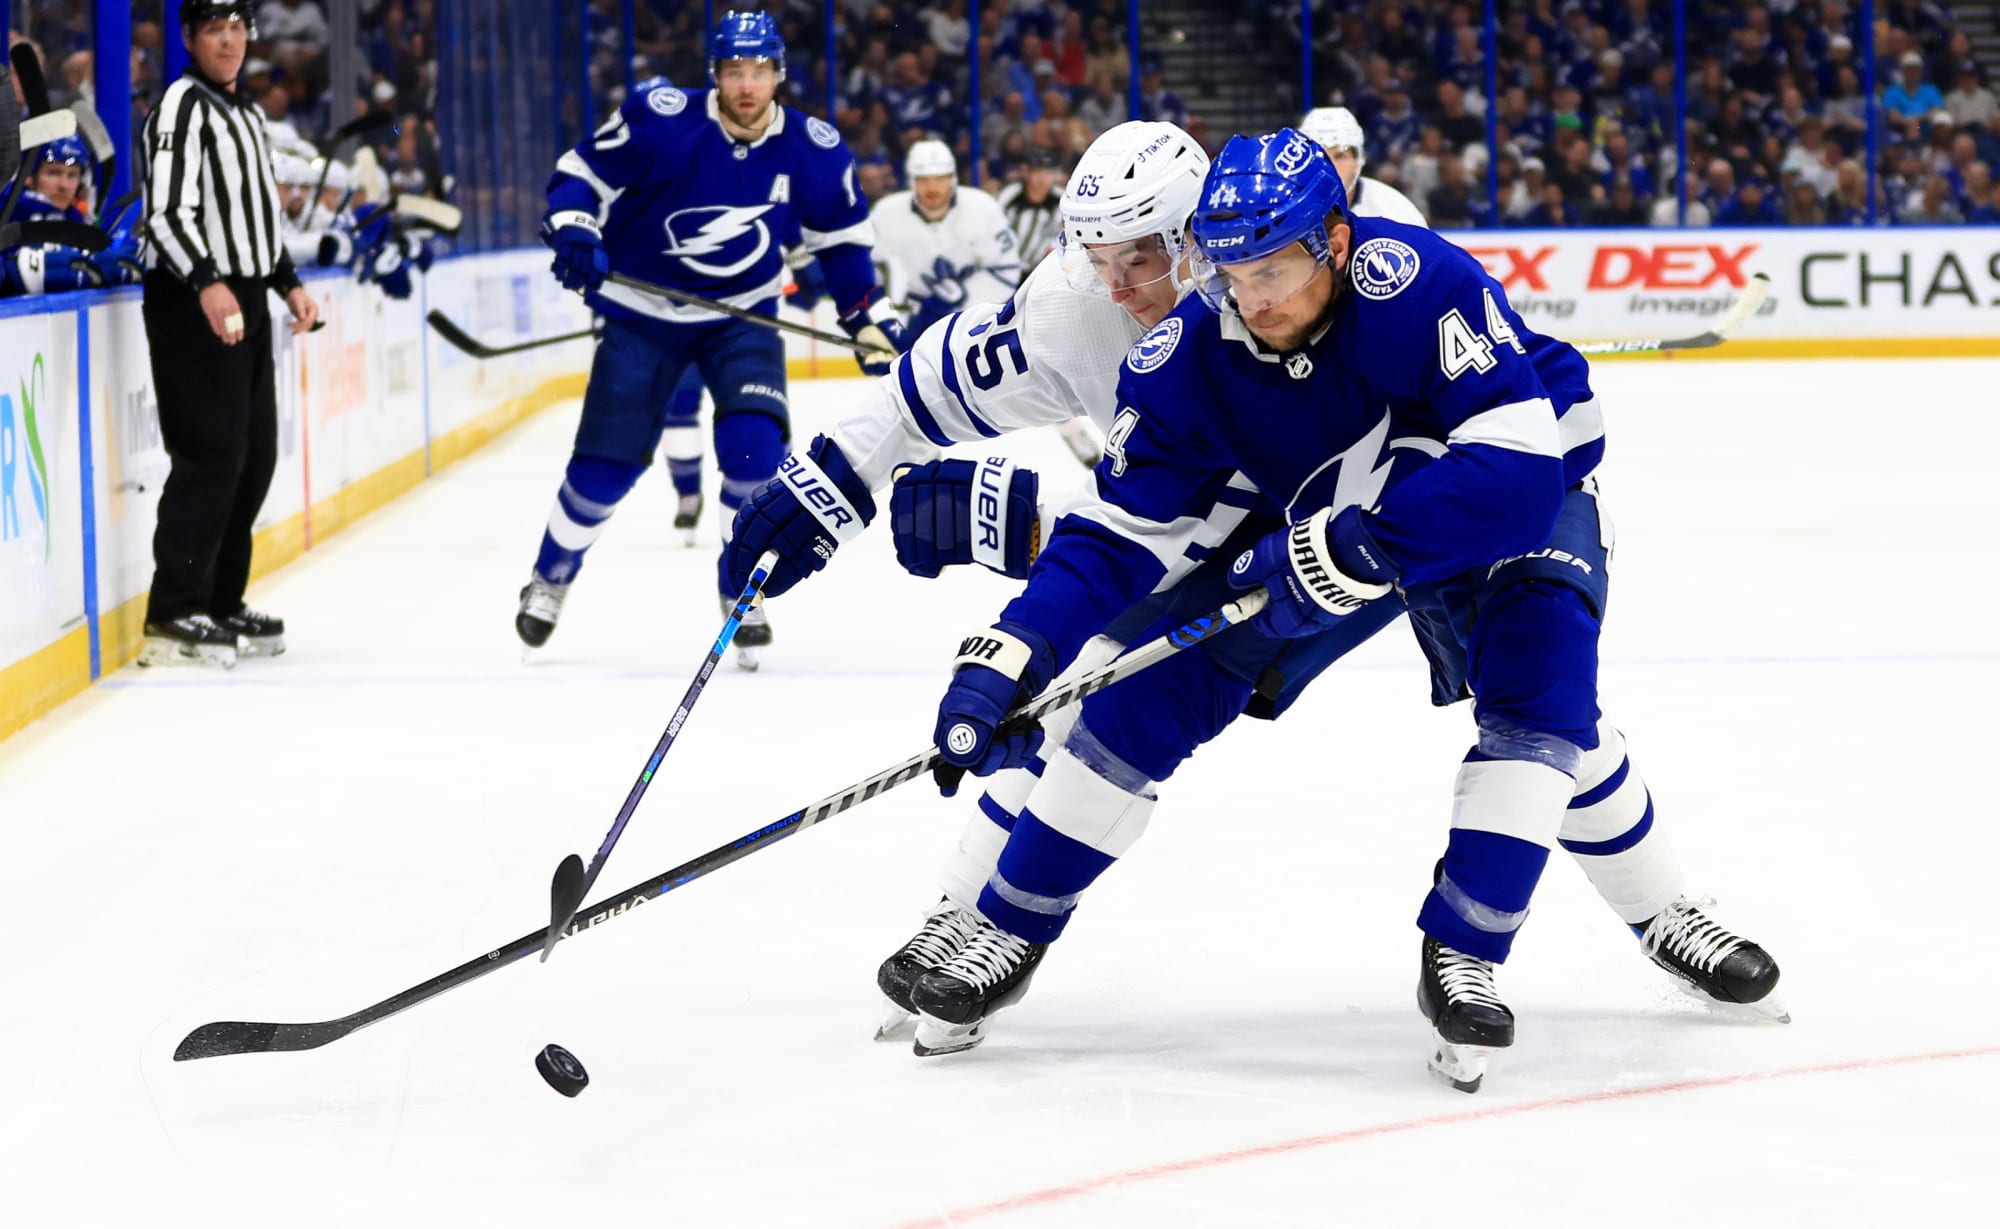 Toronto Maple Leafs vs Tampa Bay Lightning Game 4: It’s Go Time!